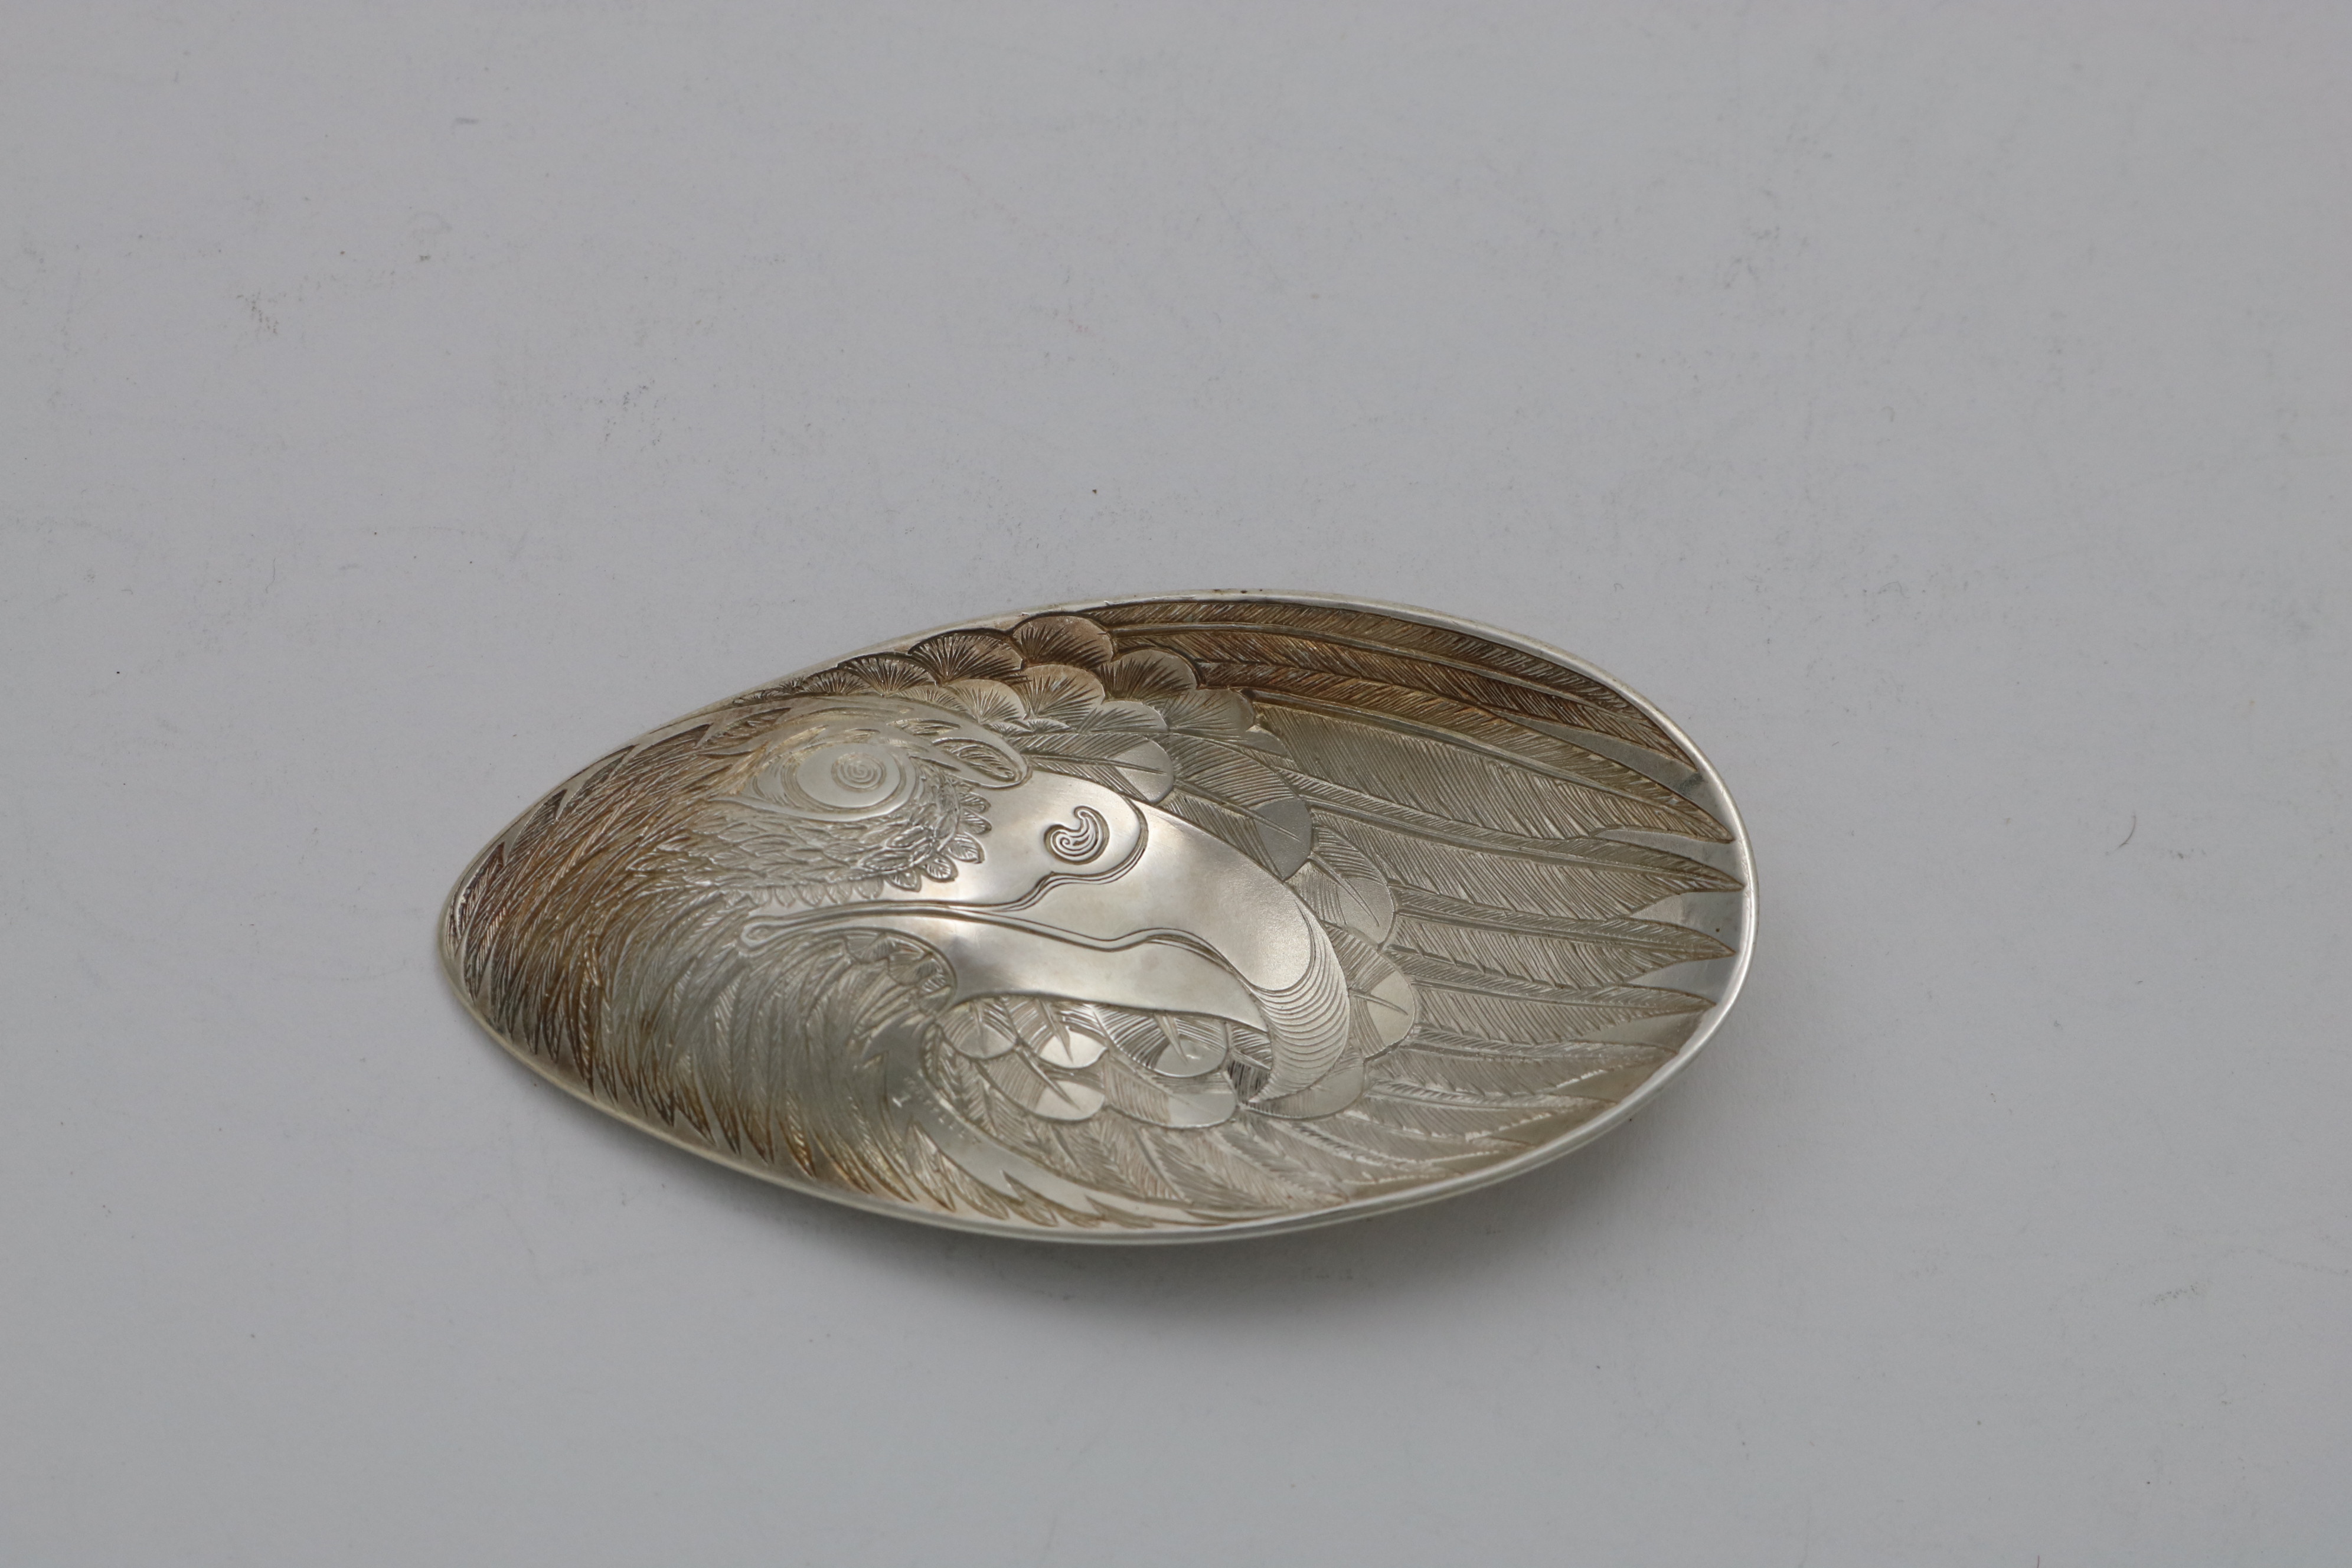 A CONTEMPORARY DOUBLE-SIDED CADDY SPOON engraved to resemble a stylised eagle's wing form made by - Image 2 of 2